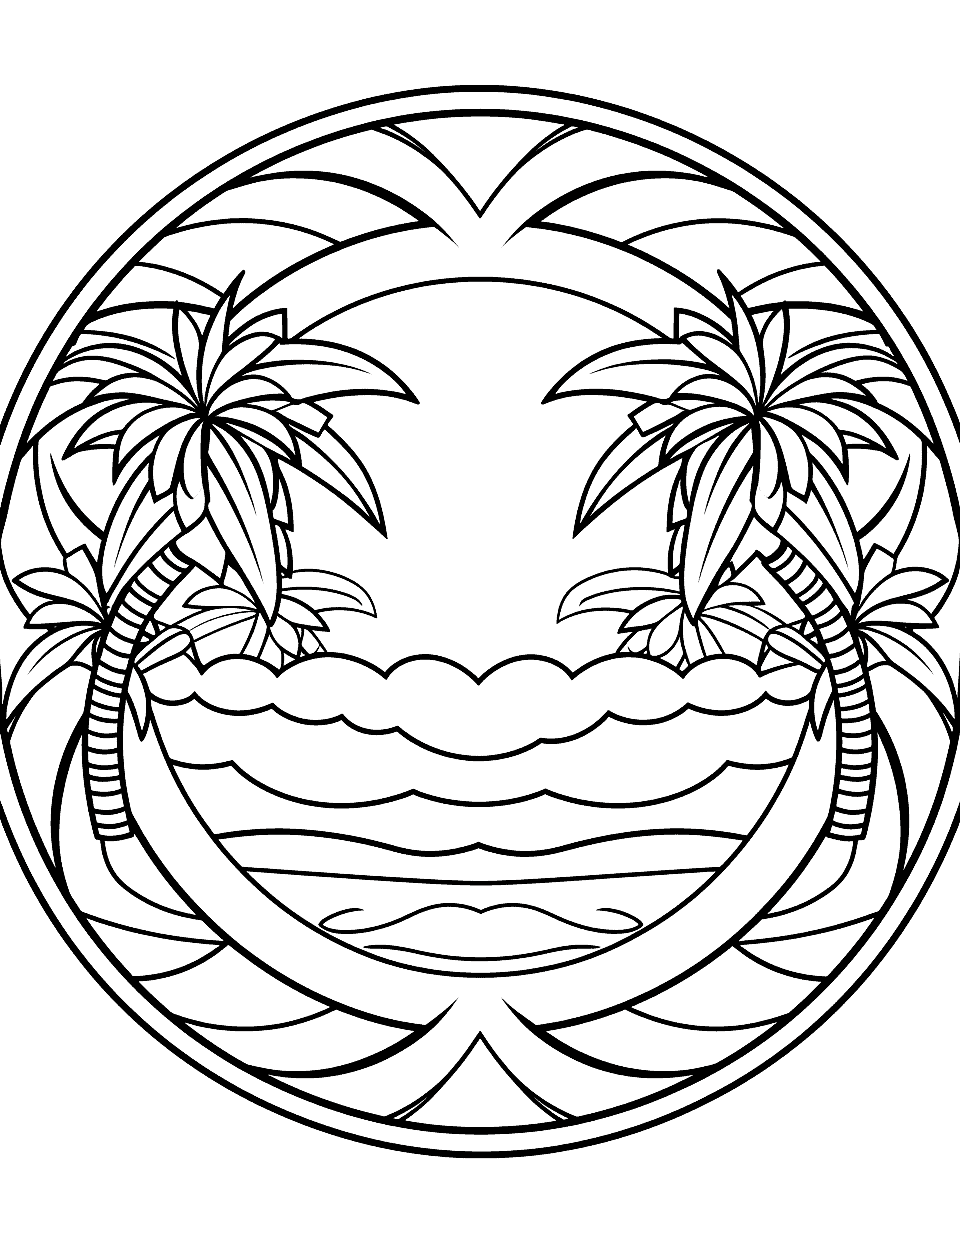 Tropical Island Mandala Coloring Page - A summer-themed mandala featuring palm trees, coconuts, and sandy beaches.